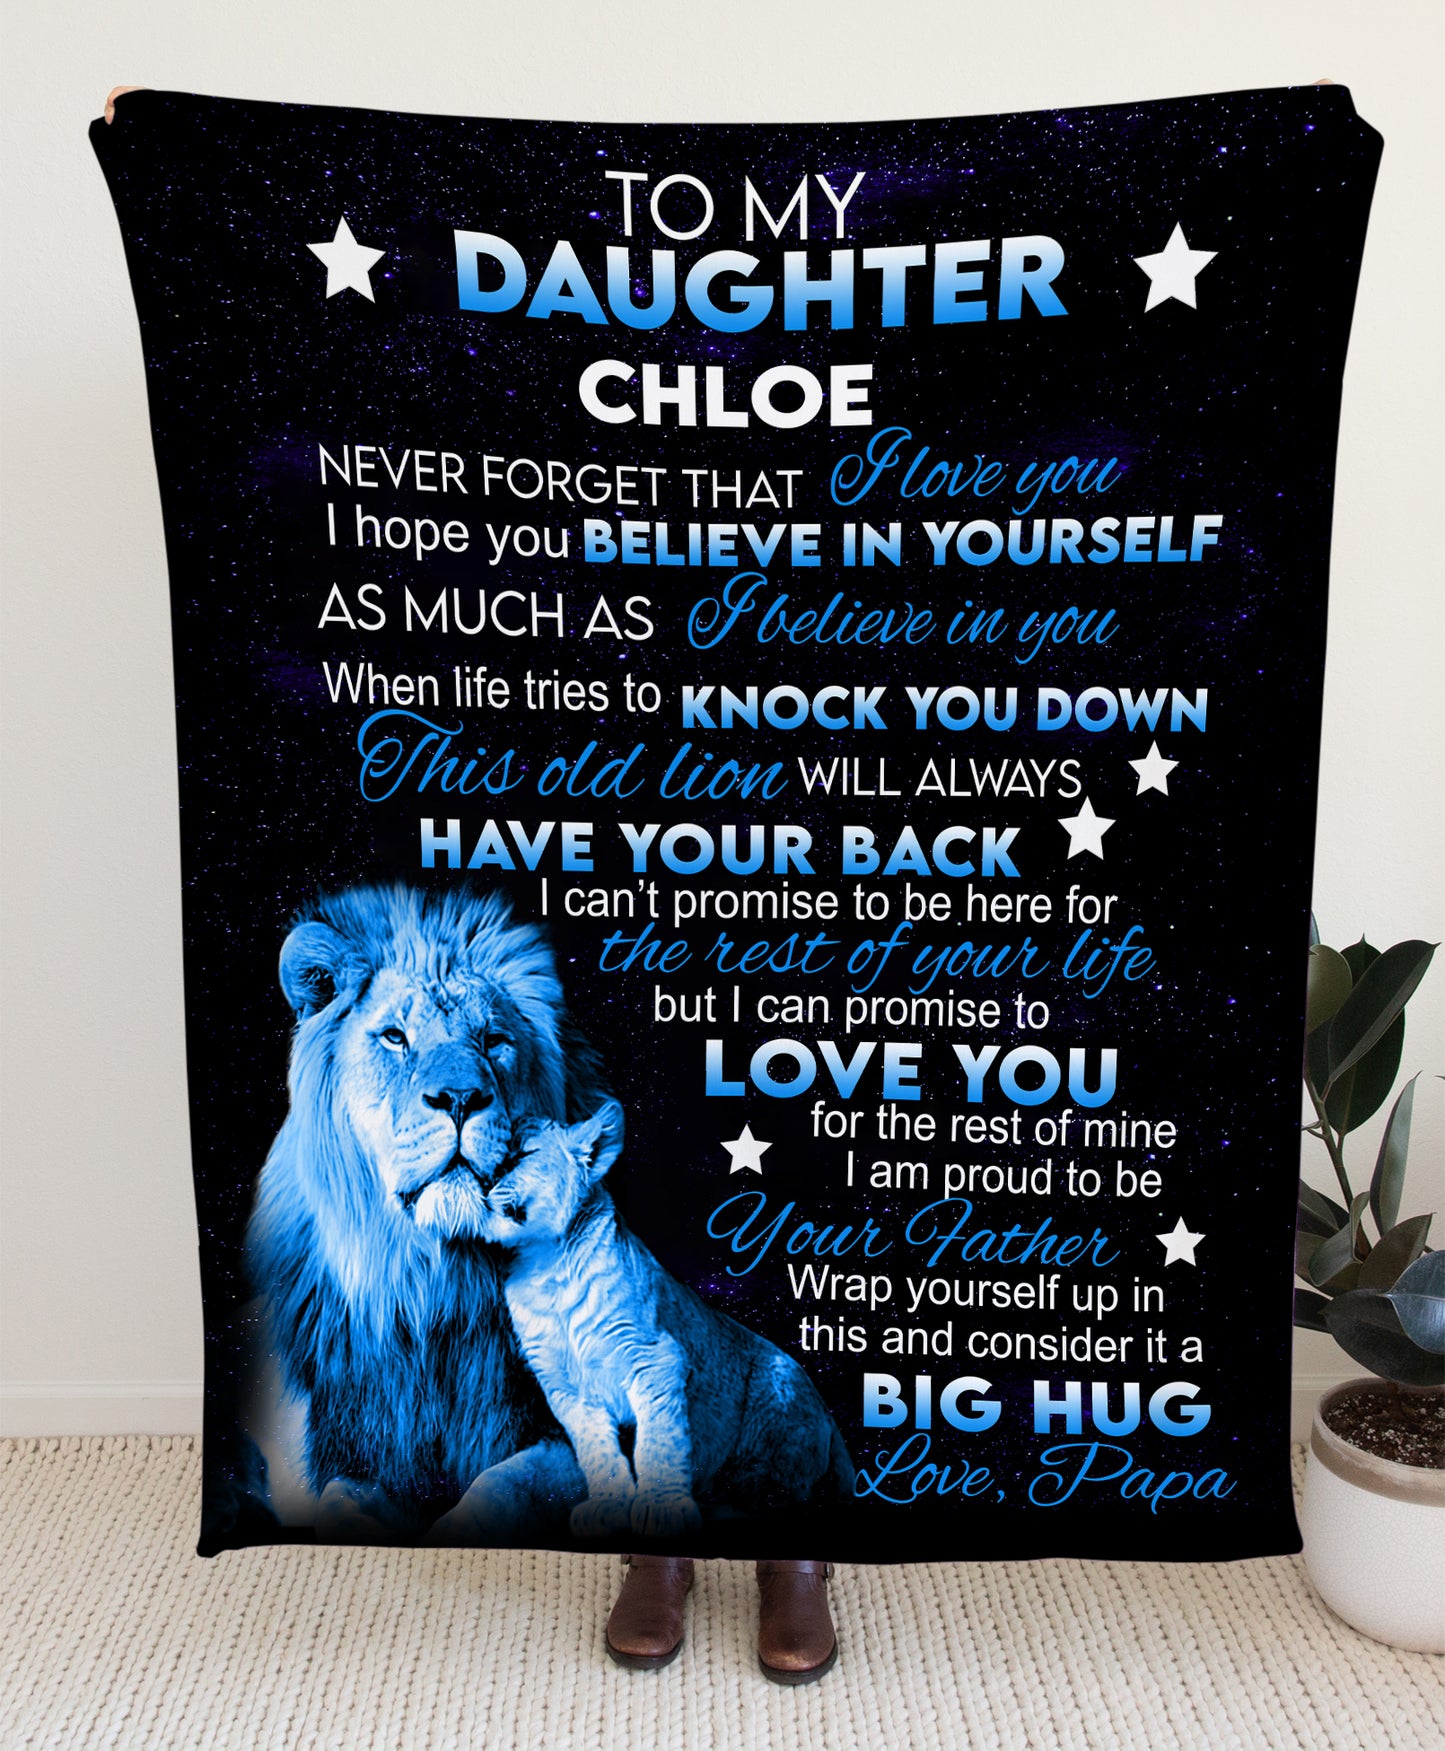 To My Daughter Chloe - From Papa - Throw Blanket 50*60